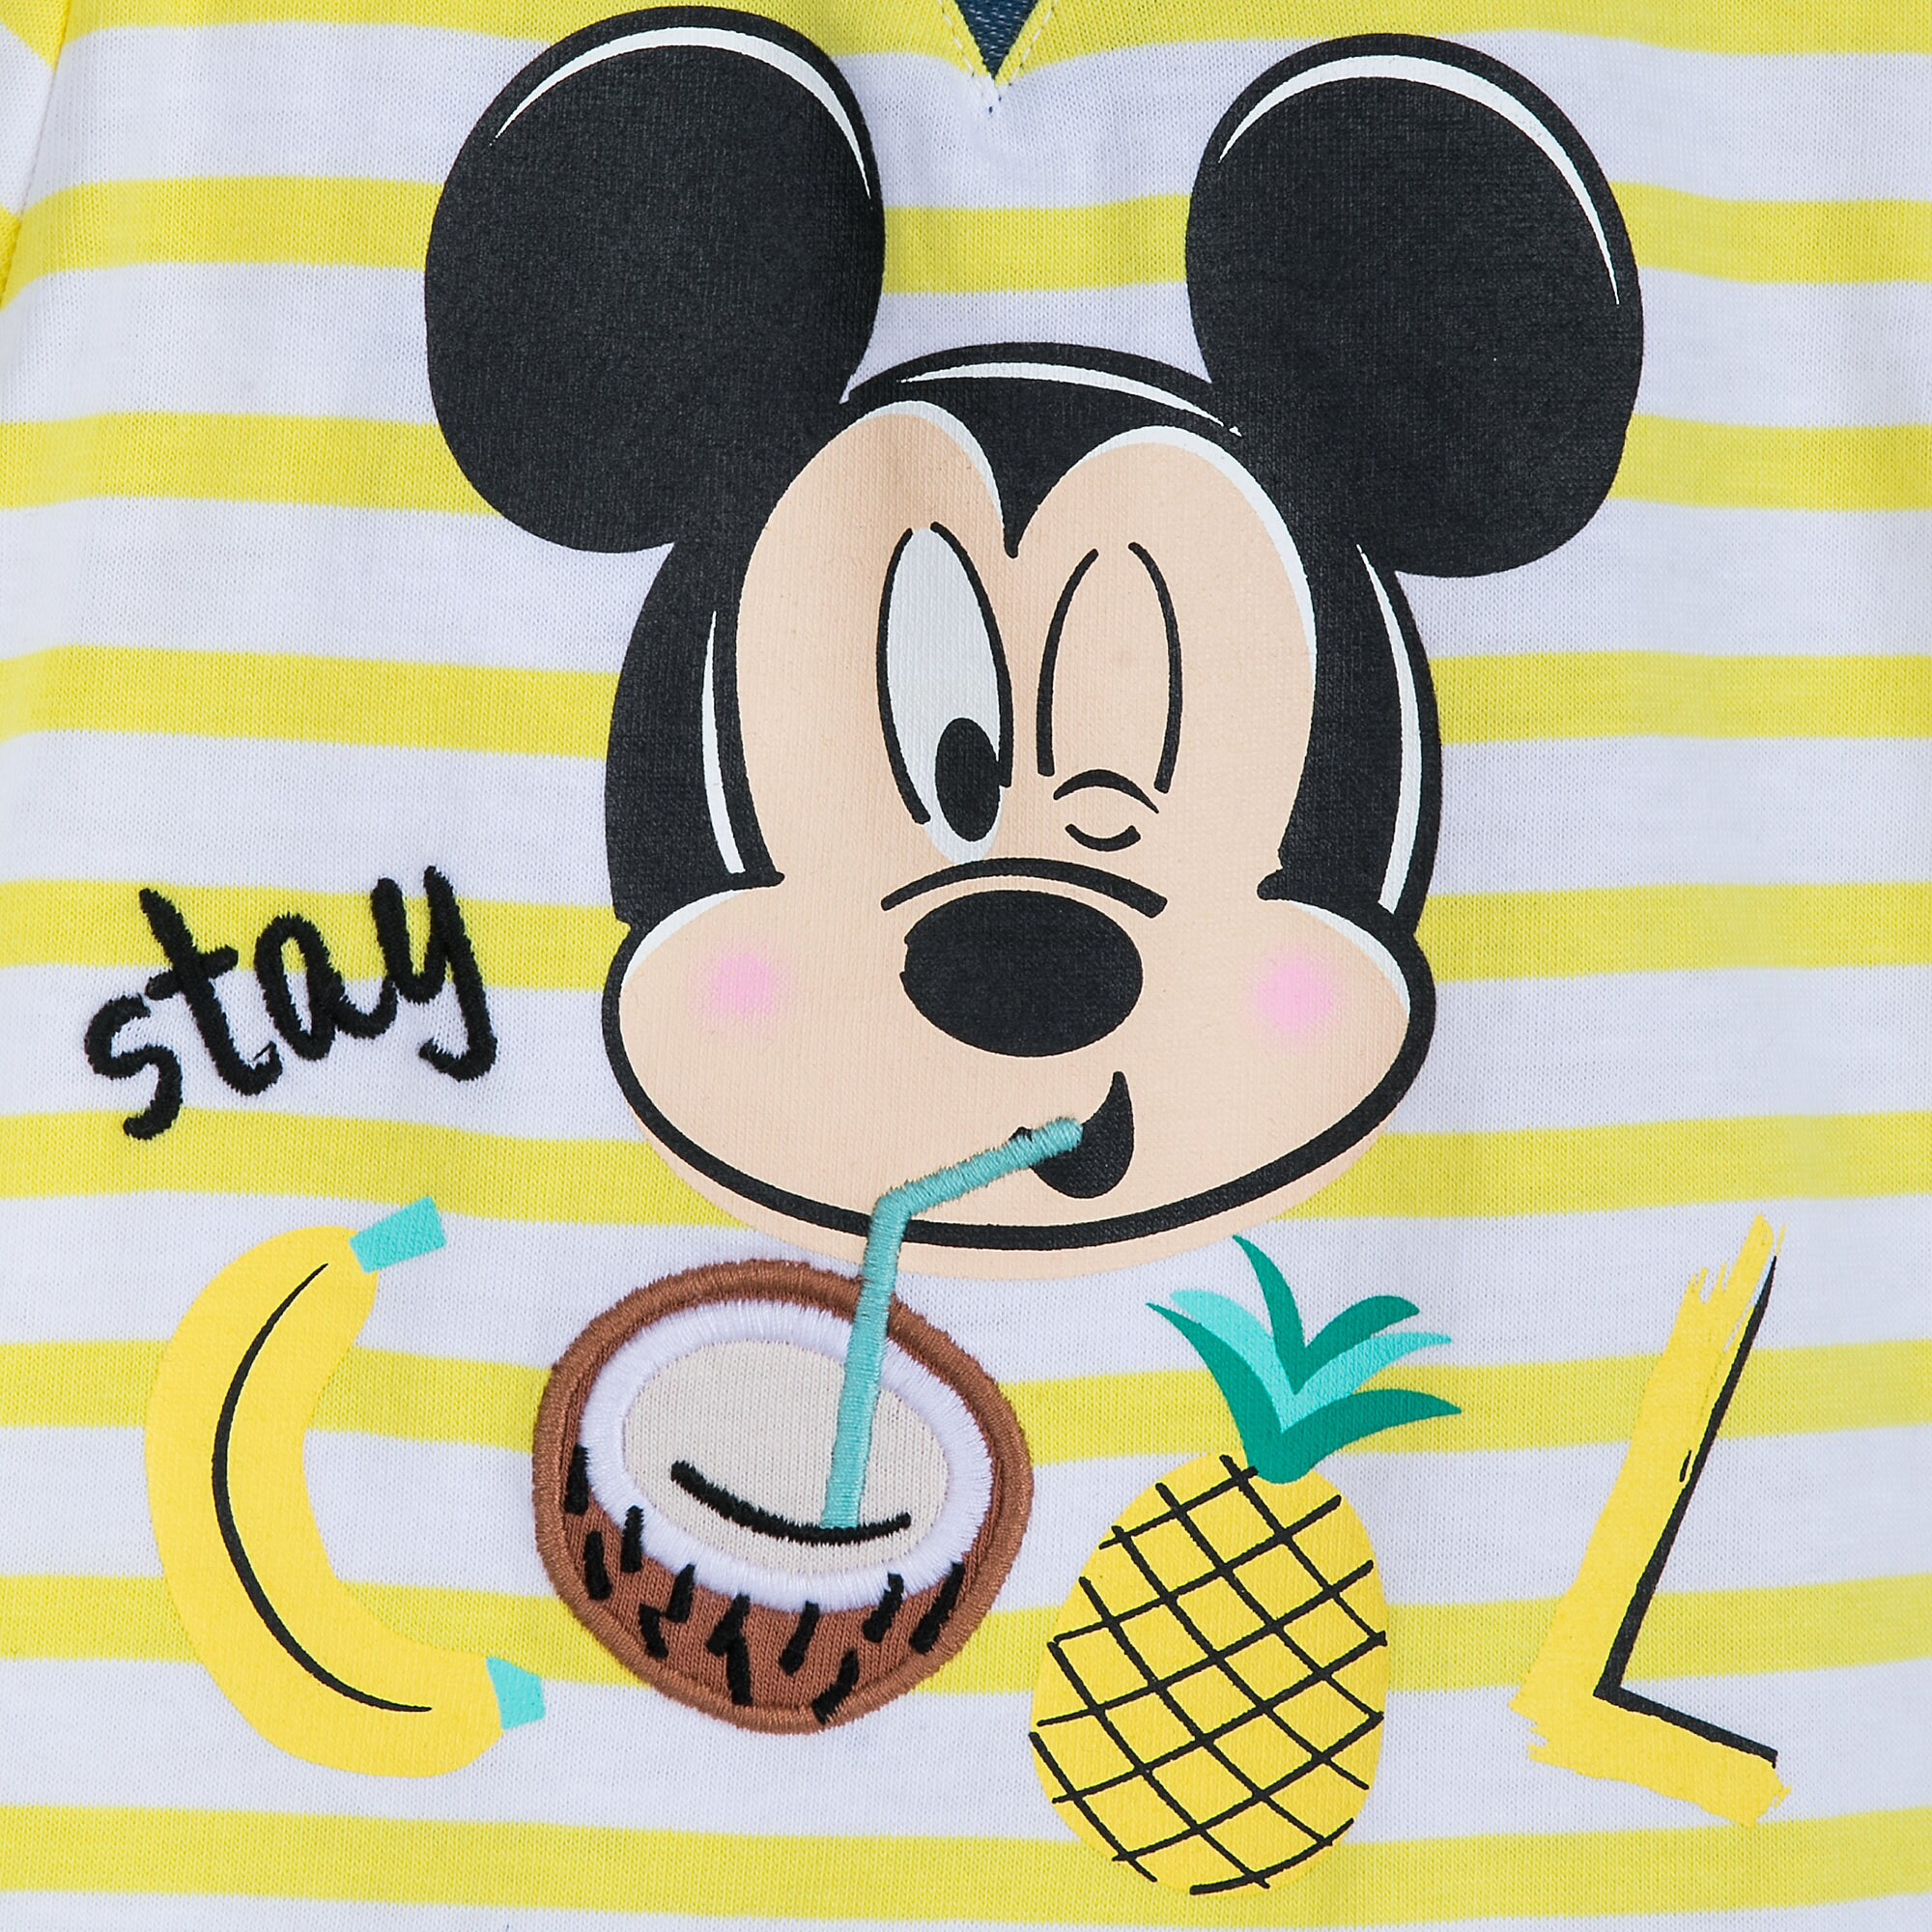 Mickey Mouse ''Stay Cool'' Shirt and Shorts Set for Baby